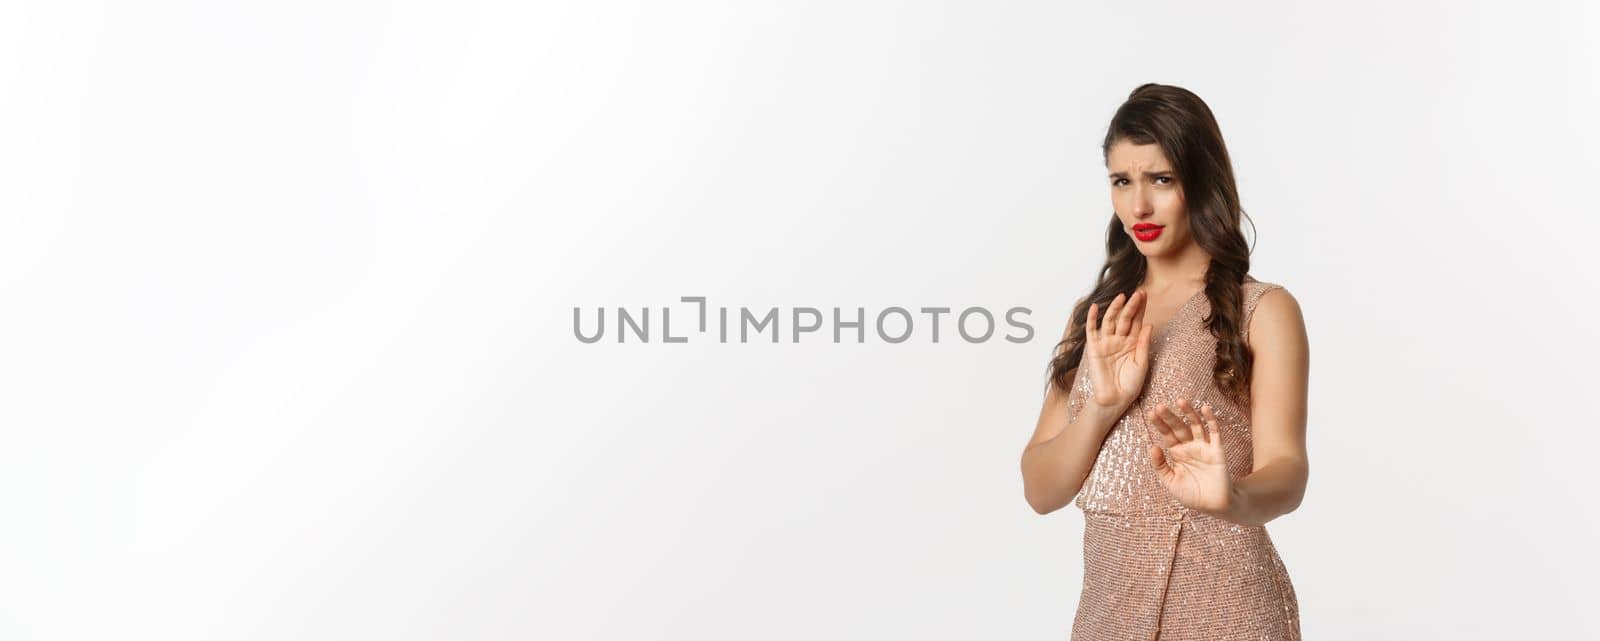 Concept of celebration, holidays and party. Woman looking displeased and rejecting something, wearing glamour dress, showing stop gesture, asking stay away, white background.